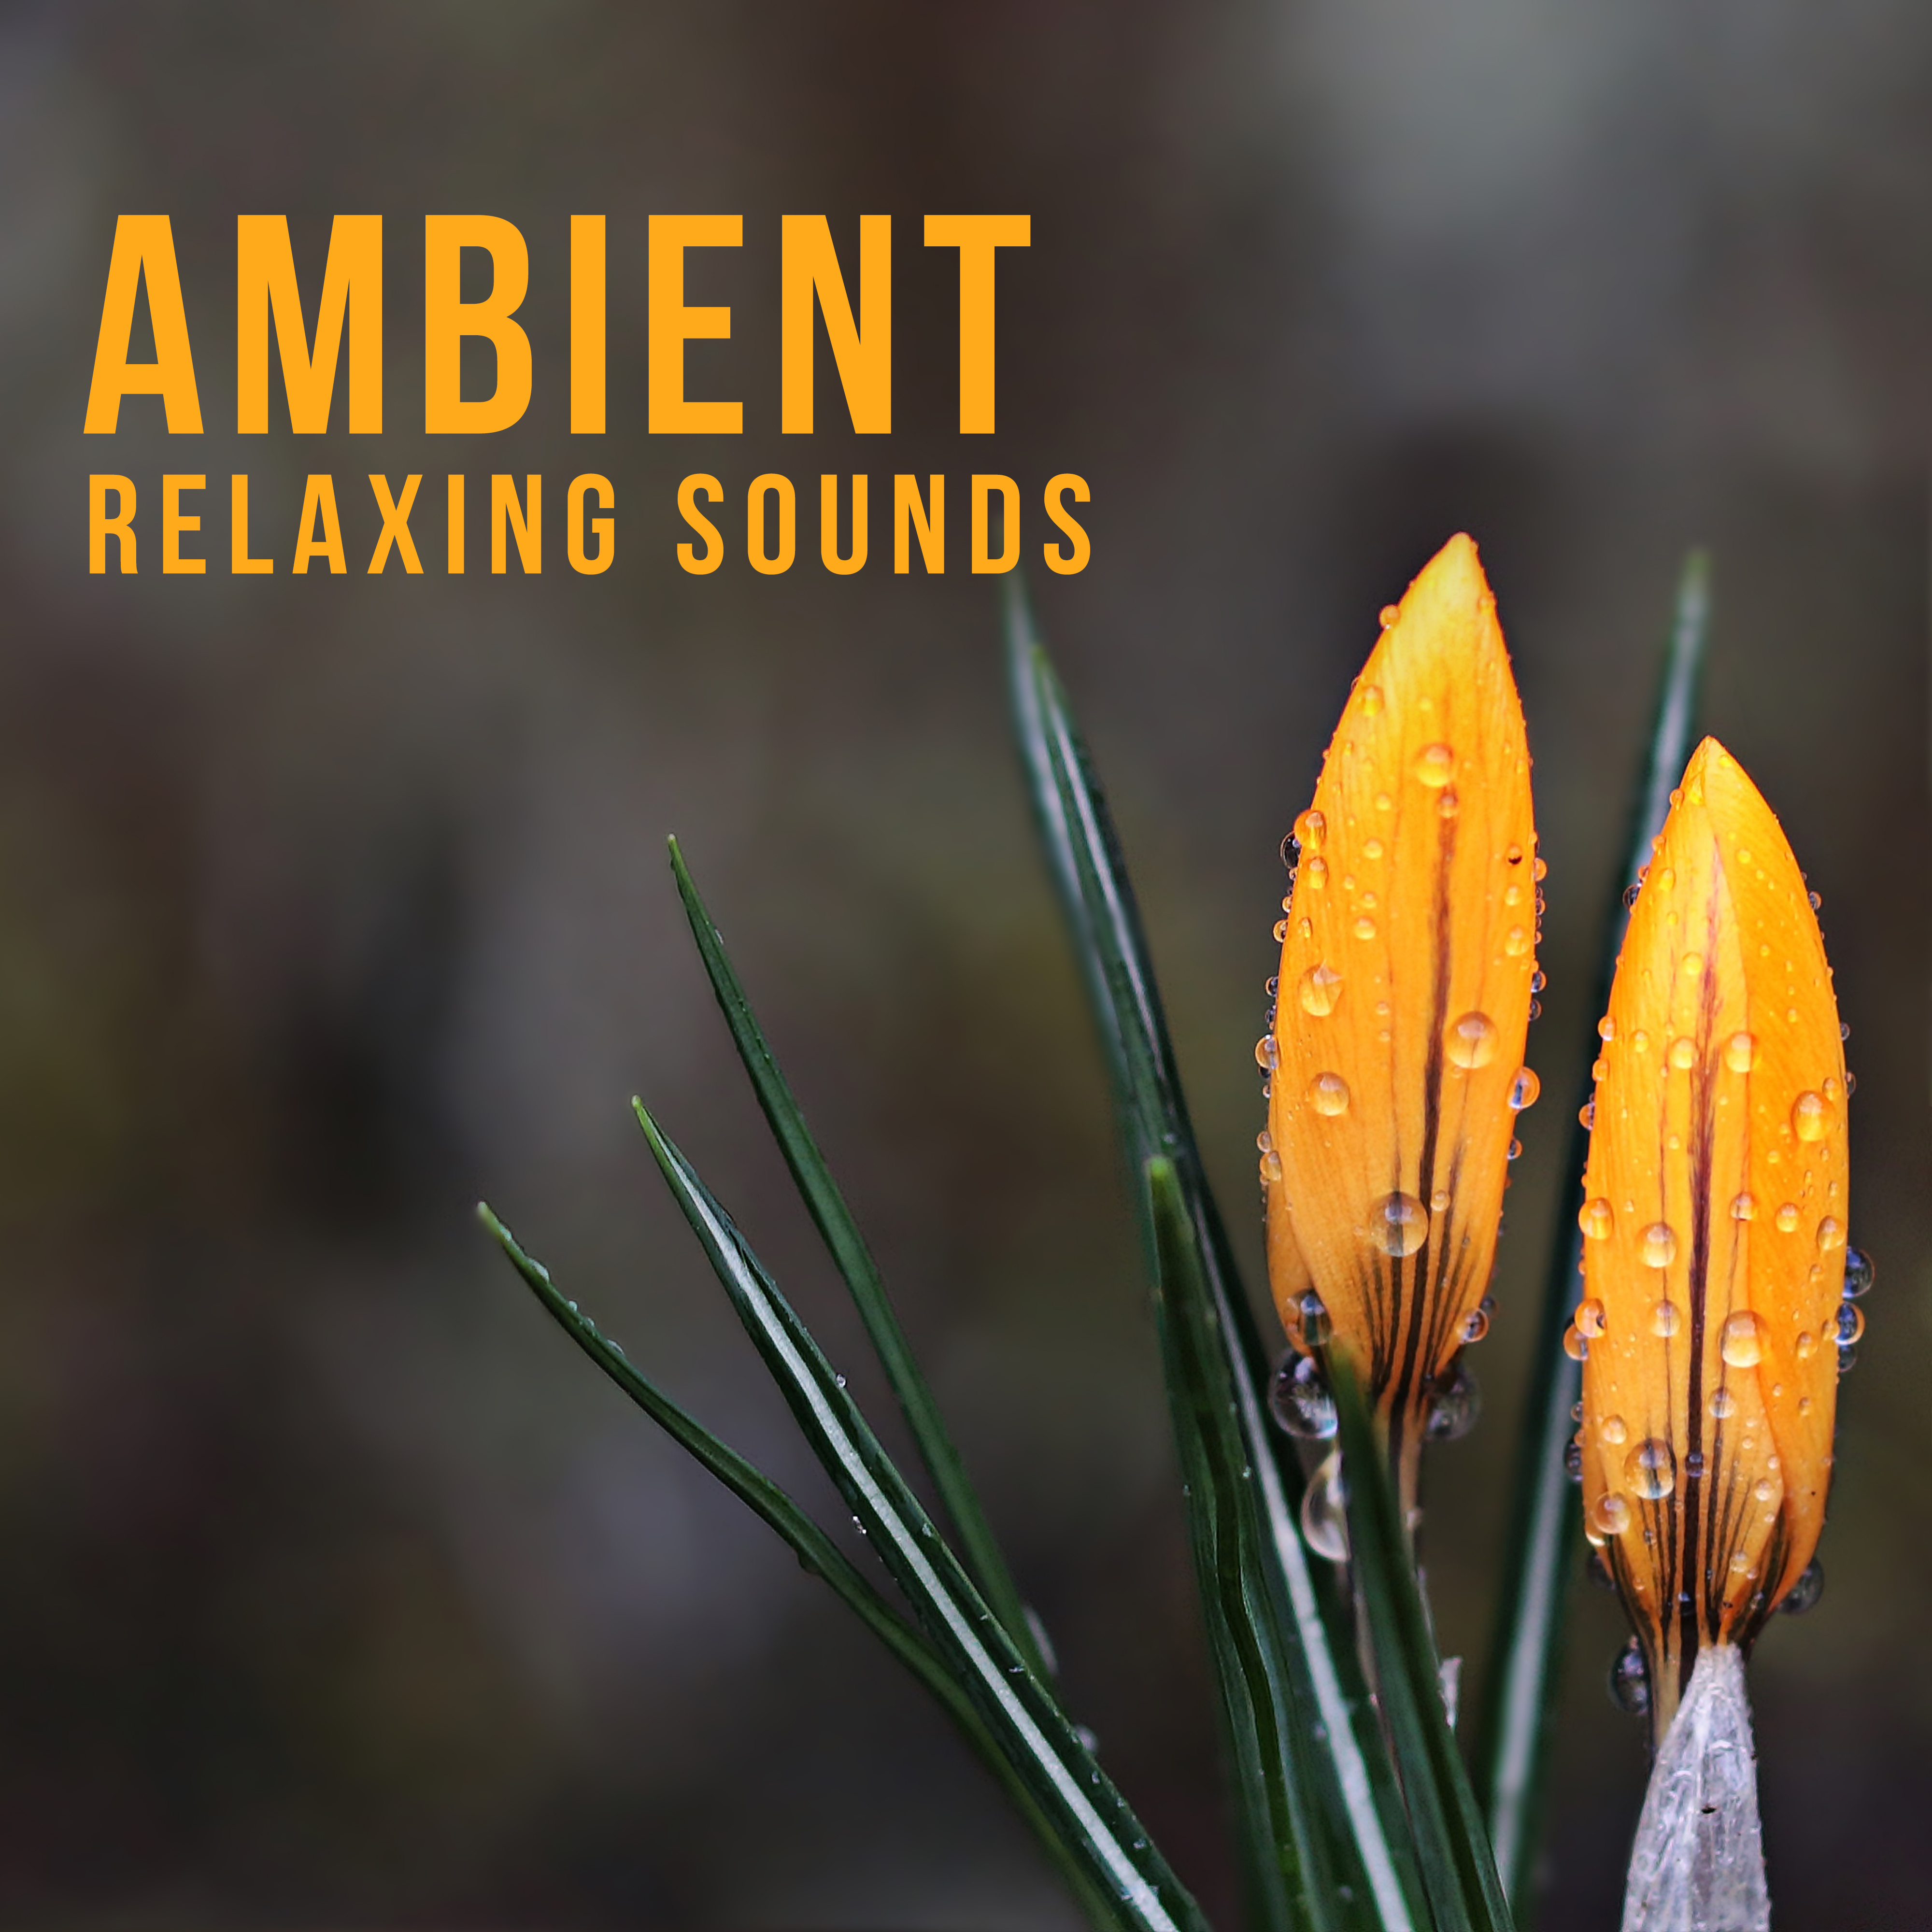 Ambient Relaxing Sounds – Relaxing Music for Lazy Day, Soothing New Age Sounds, Rest Your Mind, Soul Harmony